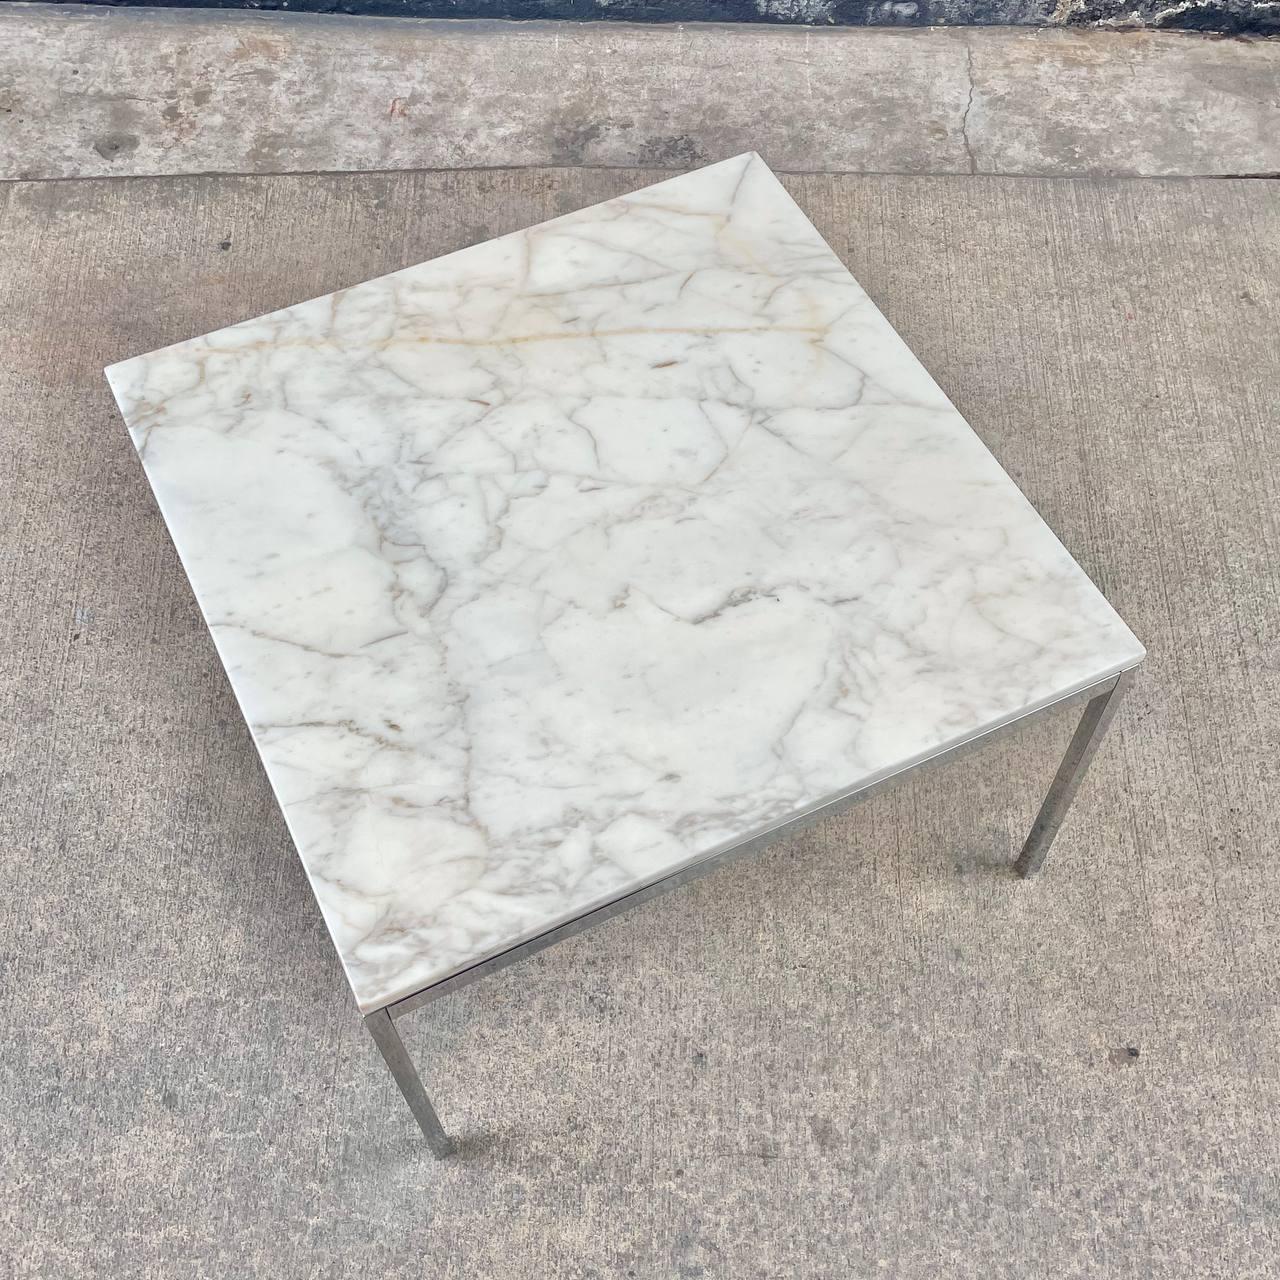 Chrome Signed Original Mid-Century Modern Carrara Marble Coffee Table by Knoll For Sale